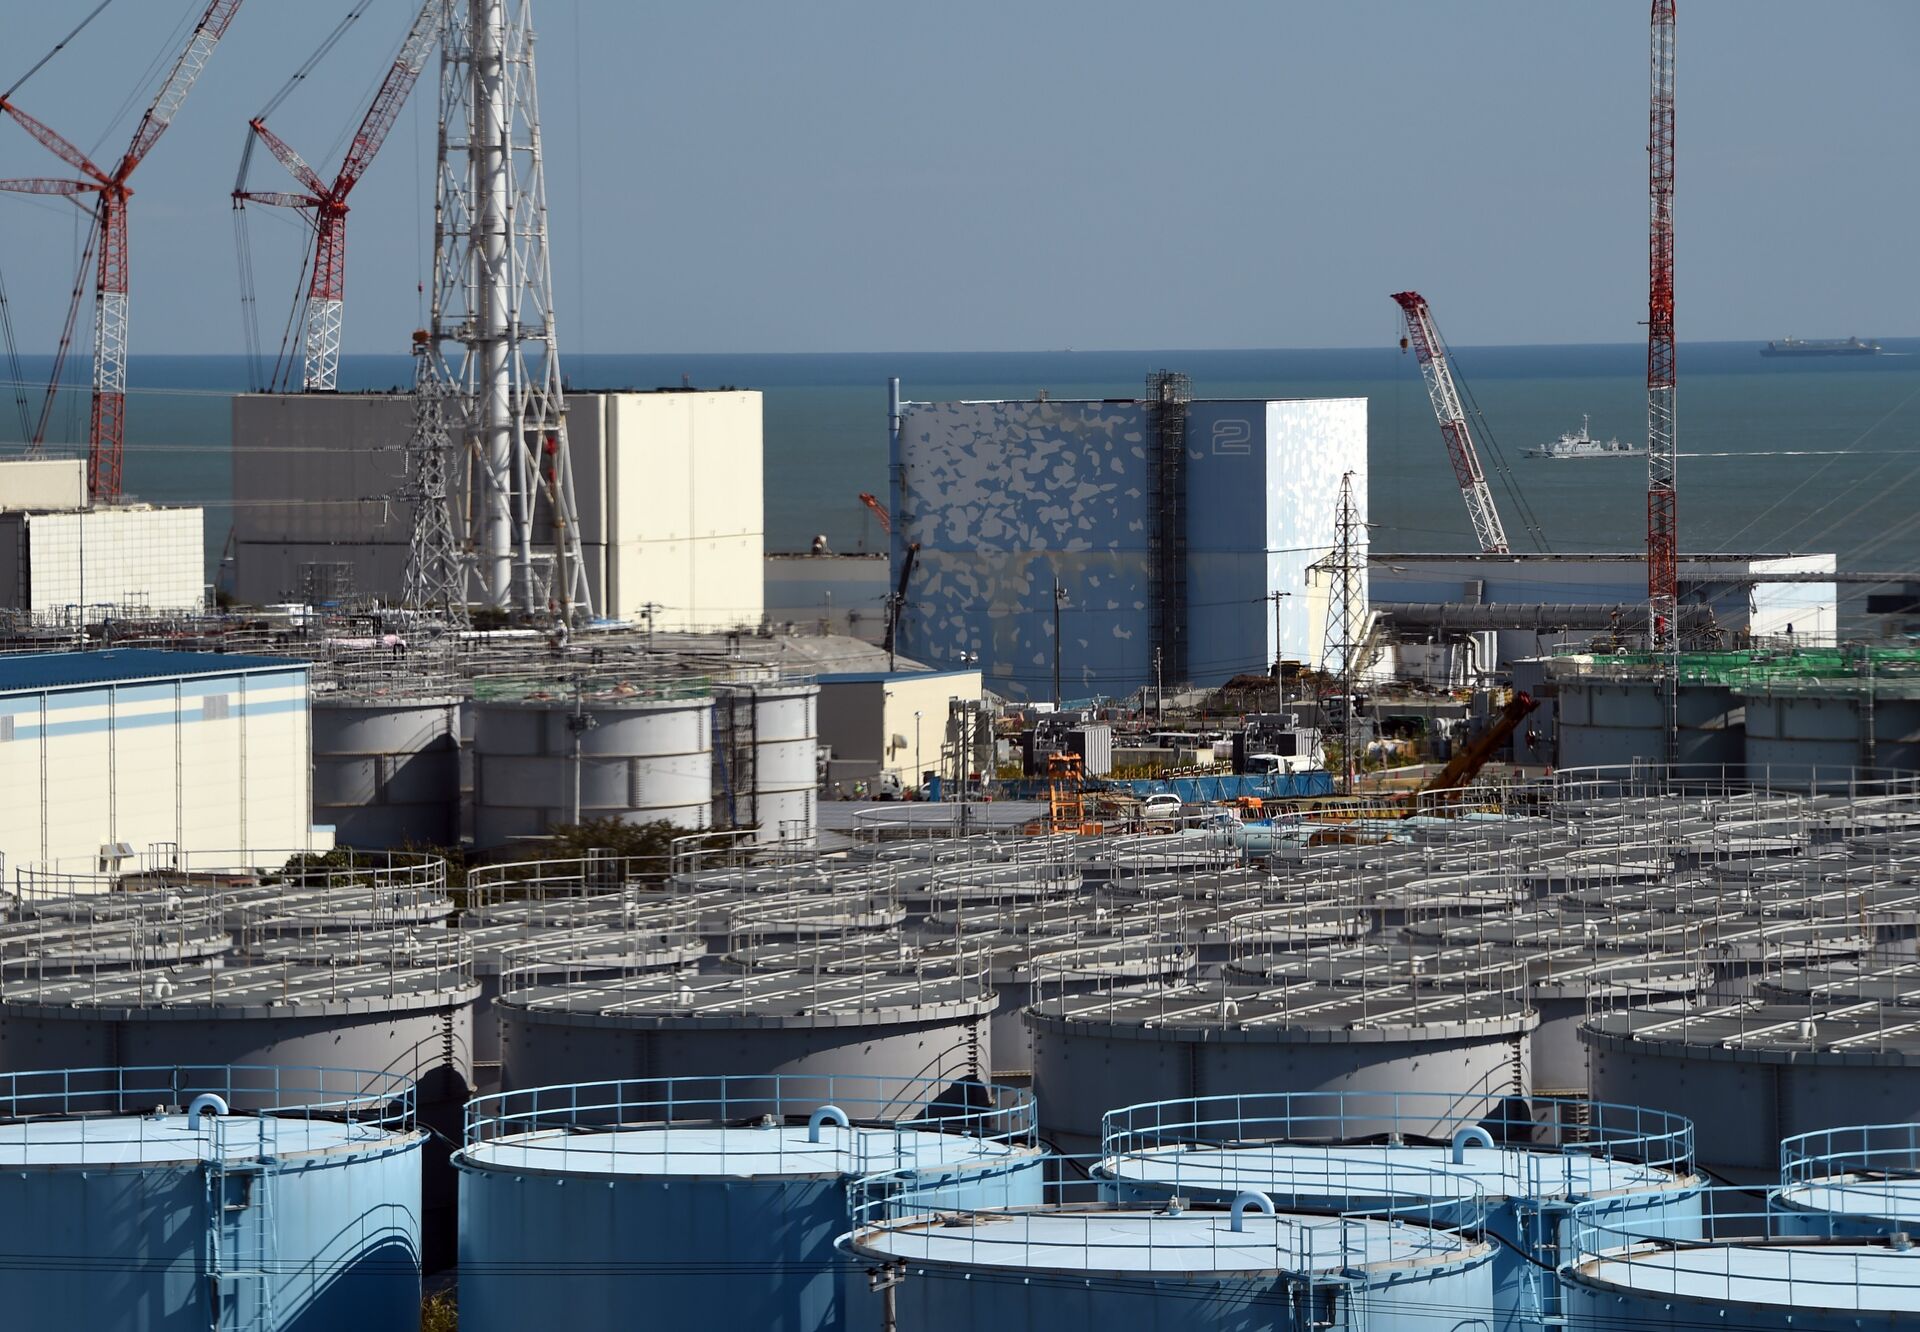 Petition to Stop Japan From Dumping Contaminated Fukushima Water Into Ocean Gains Massive Support - Sputnik International, 1920, 12.04.2021